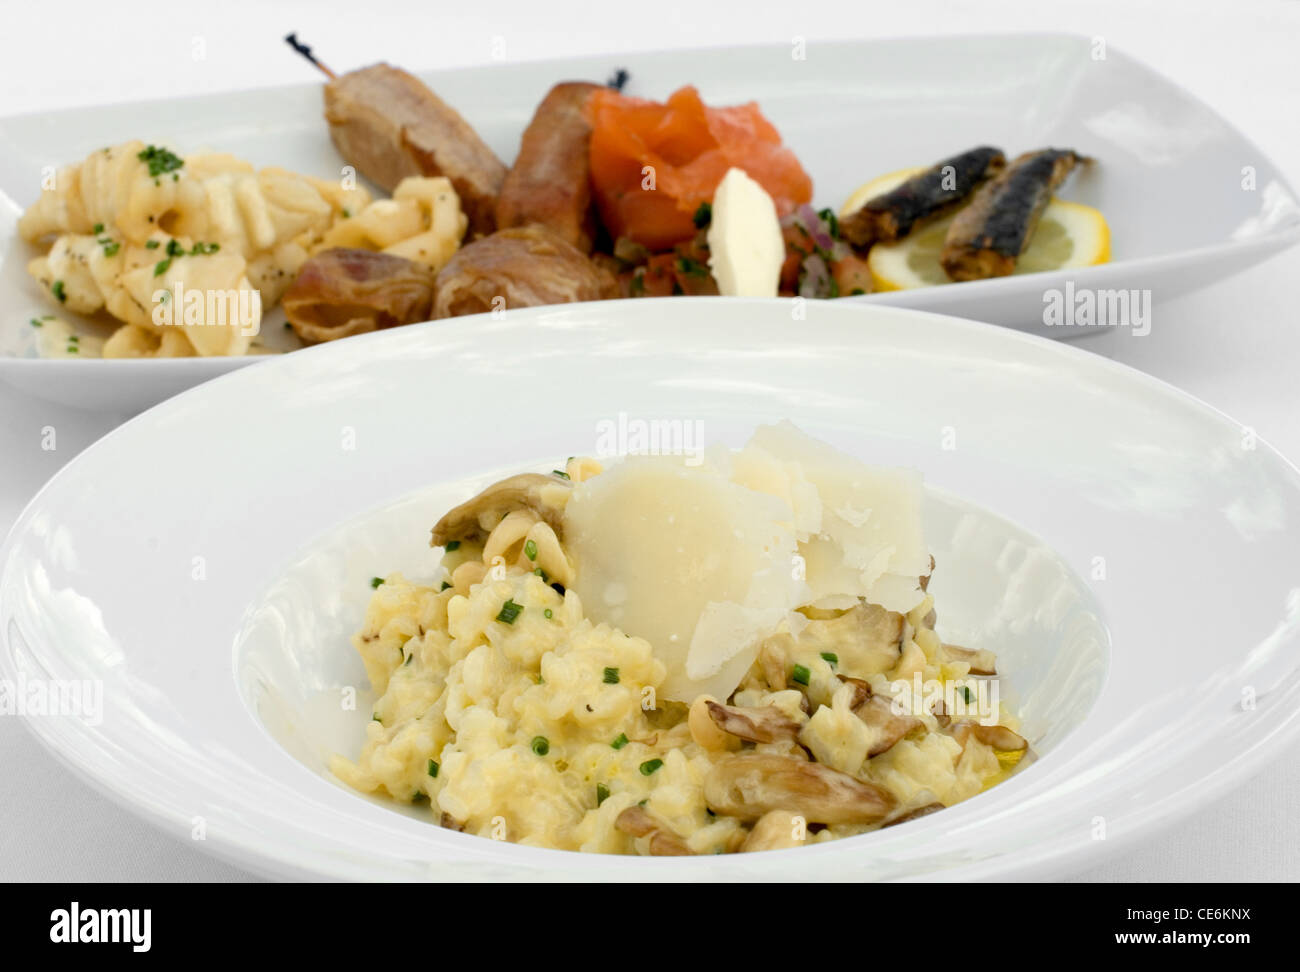 Mushroom Risotto and an Entree Tasting Plate Stock Photo